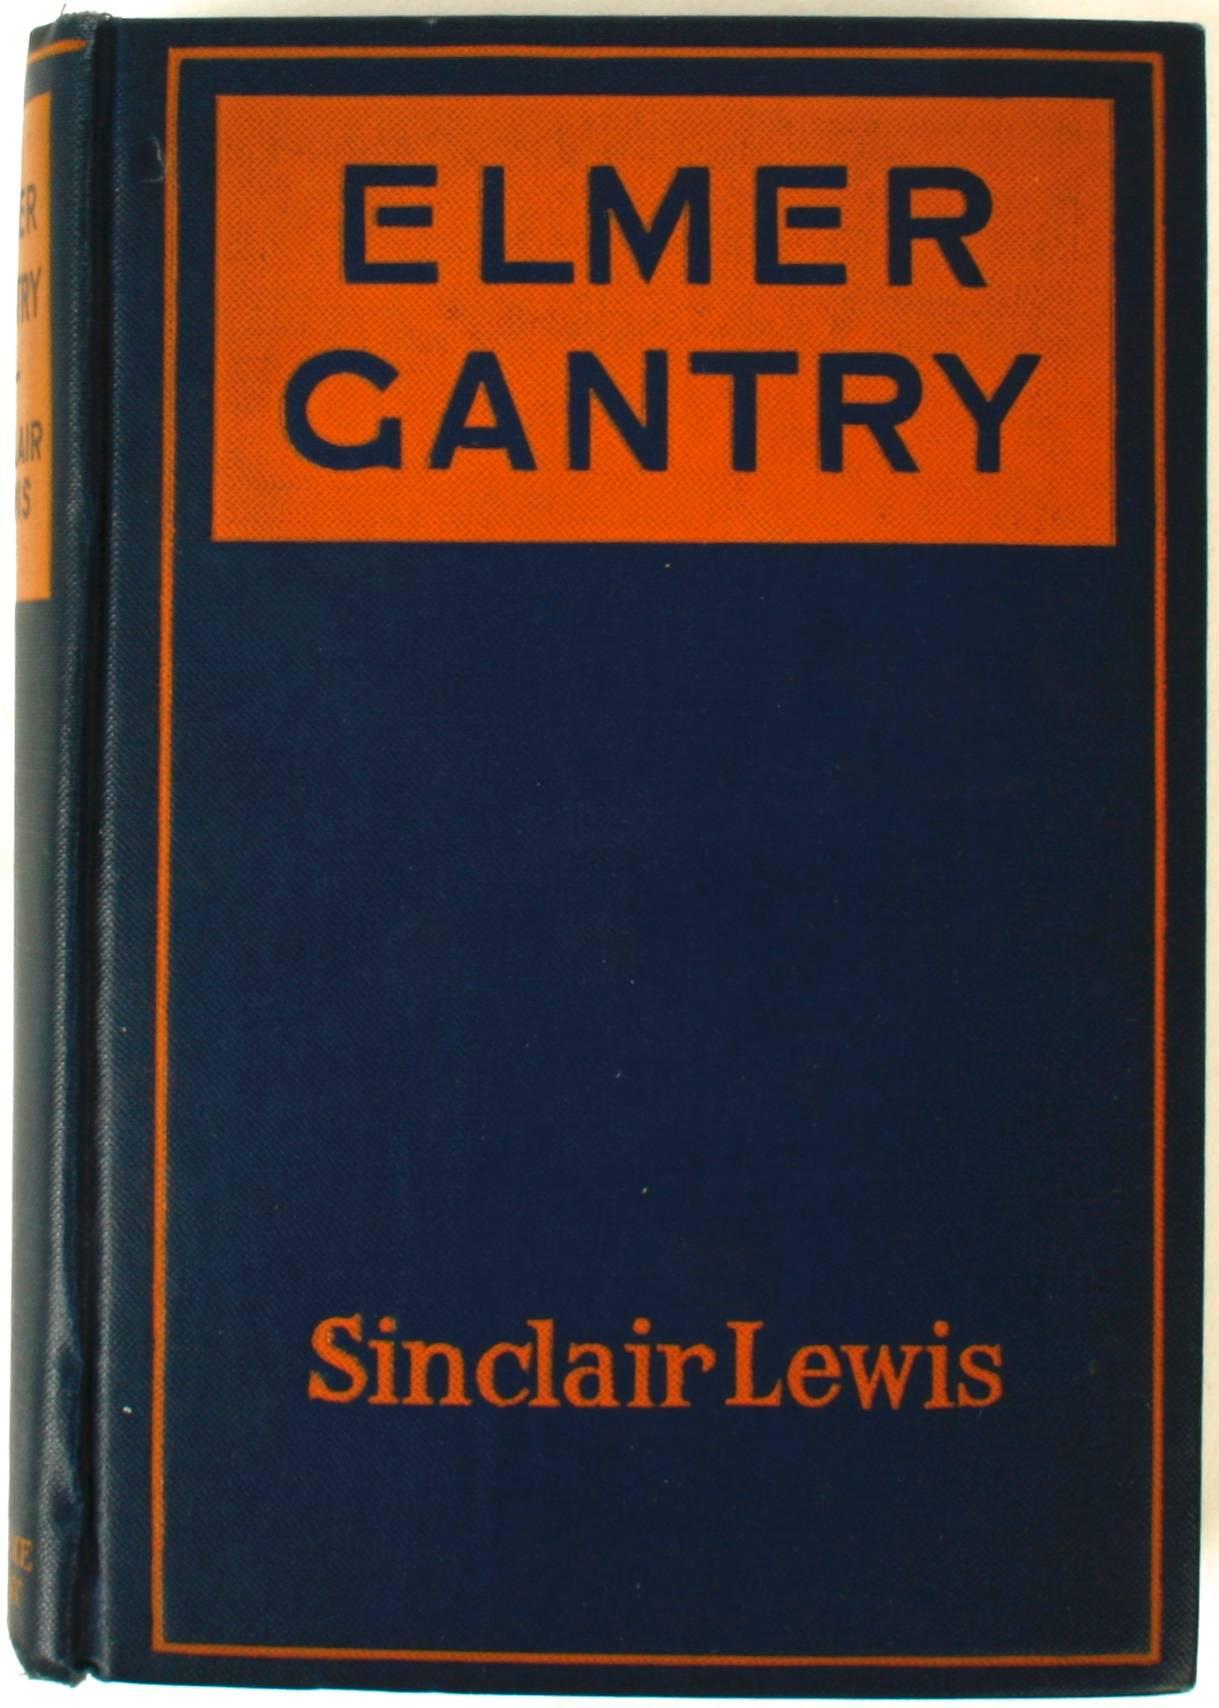 Elmer Gantry by Sinclair Lewis. Harcourt, Brace, and Company, New York, 1927. First edition hardcover with facsimile dust jacket. 432 pp. First issue binding with G resembling a C on the spine that was changed in later printings. It was a satirical